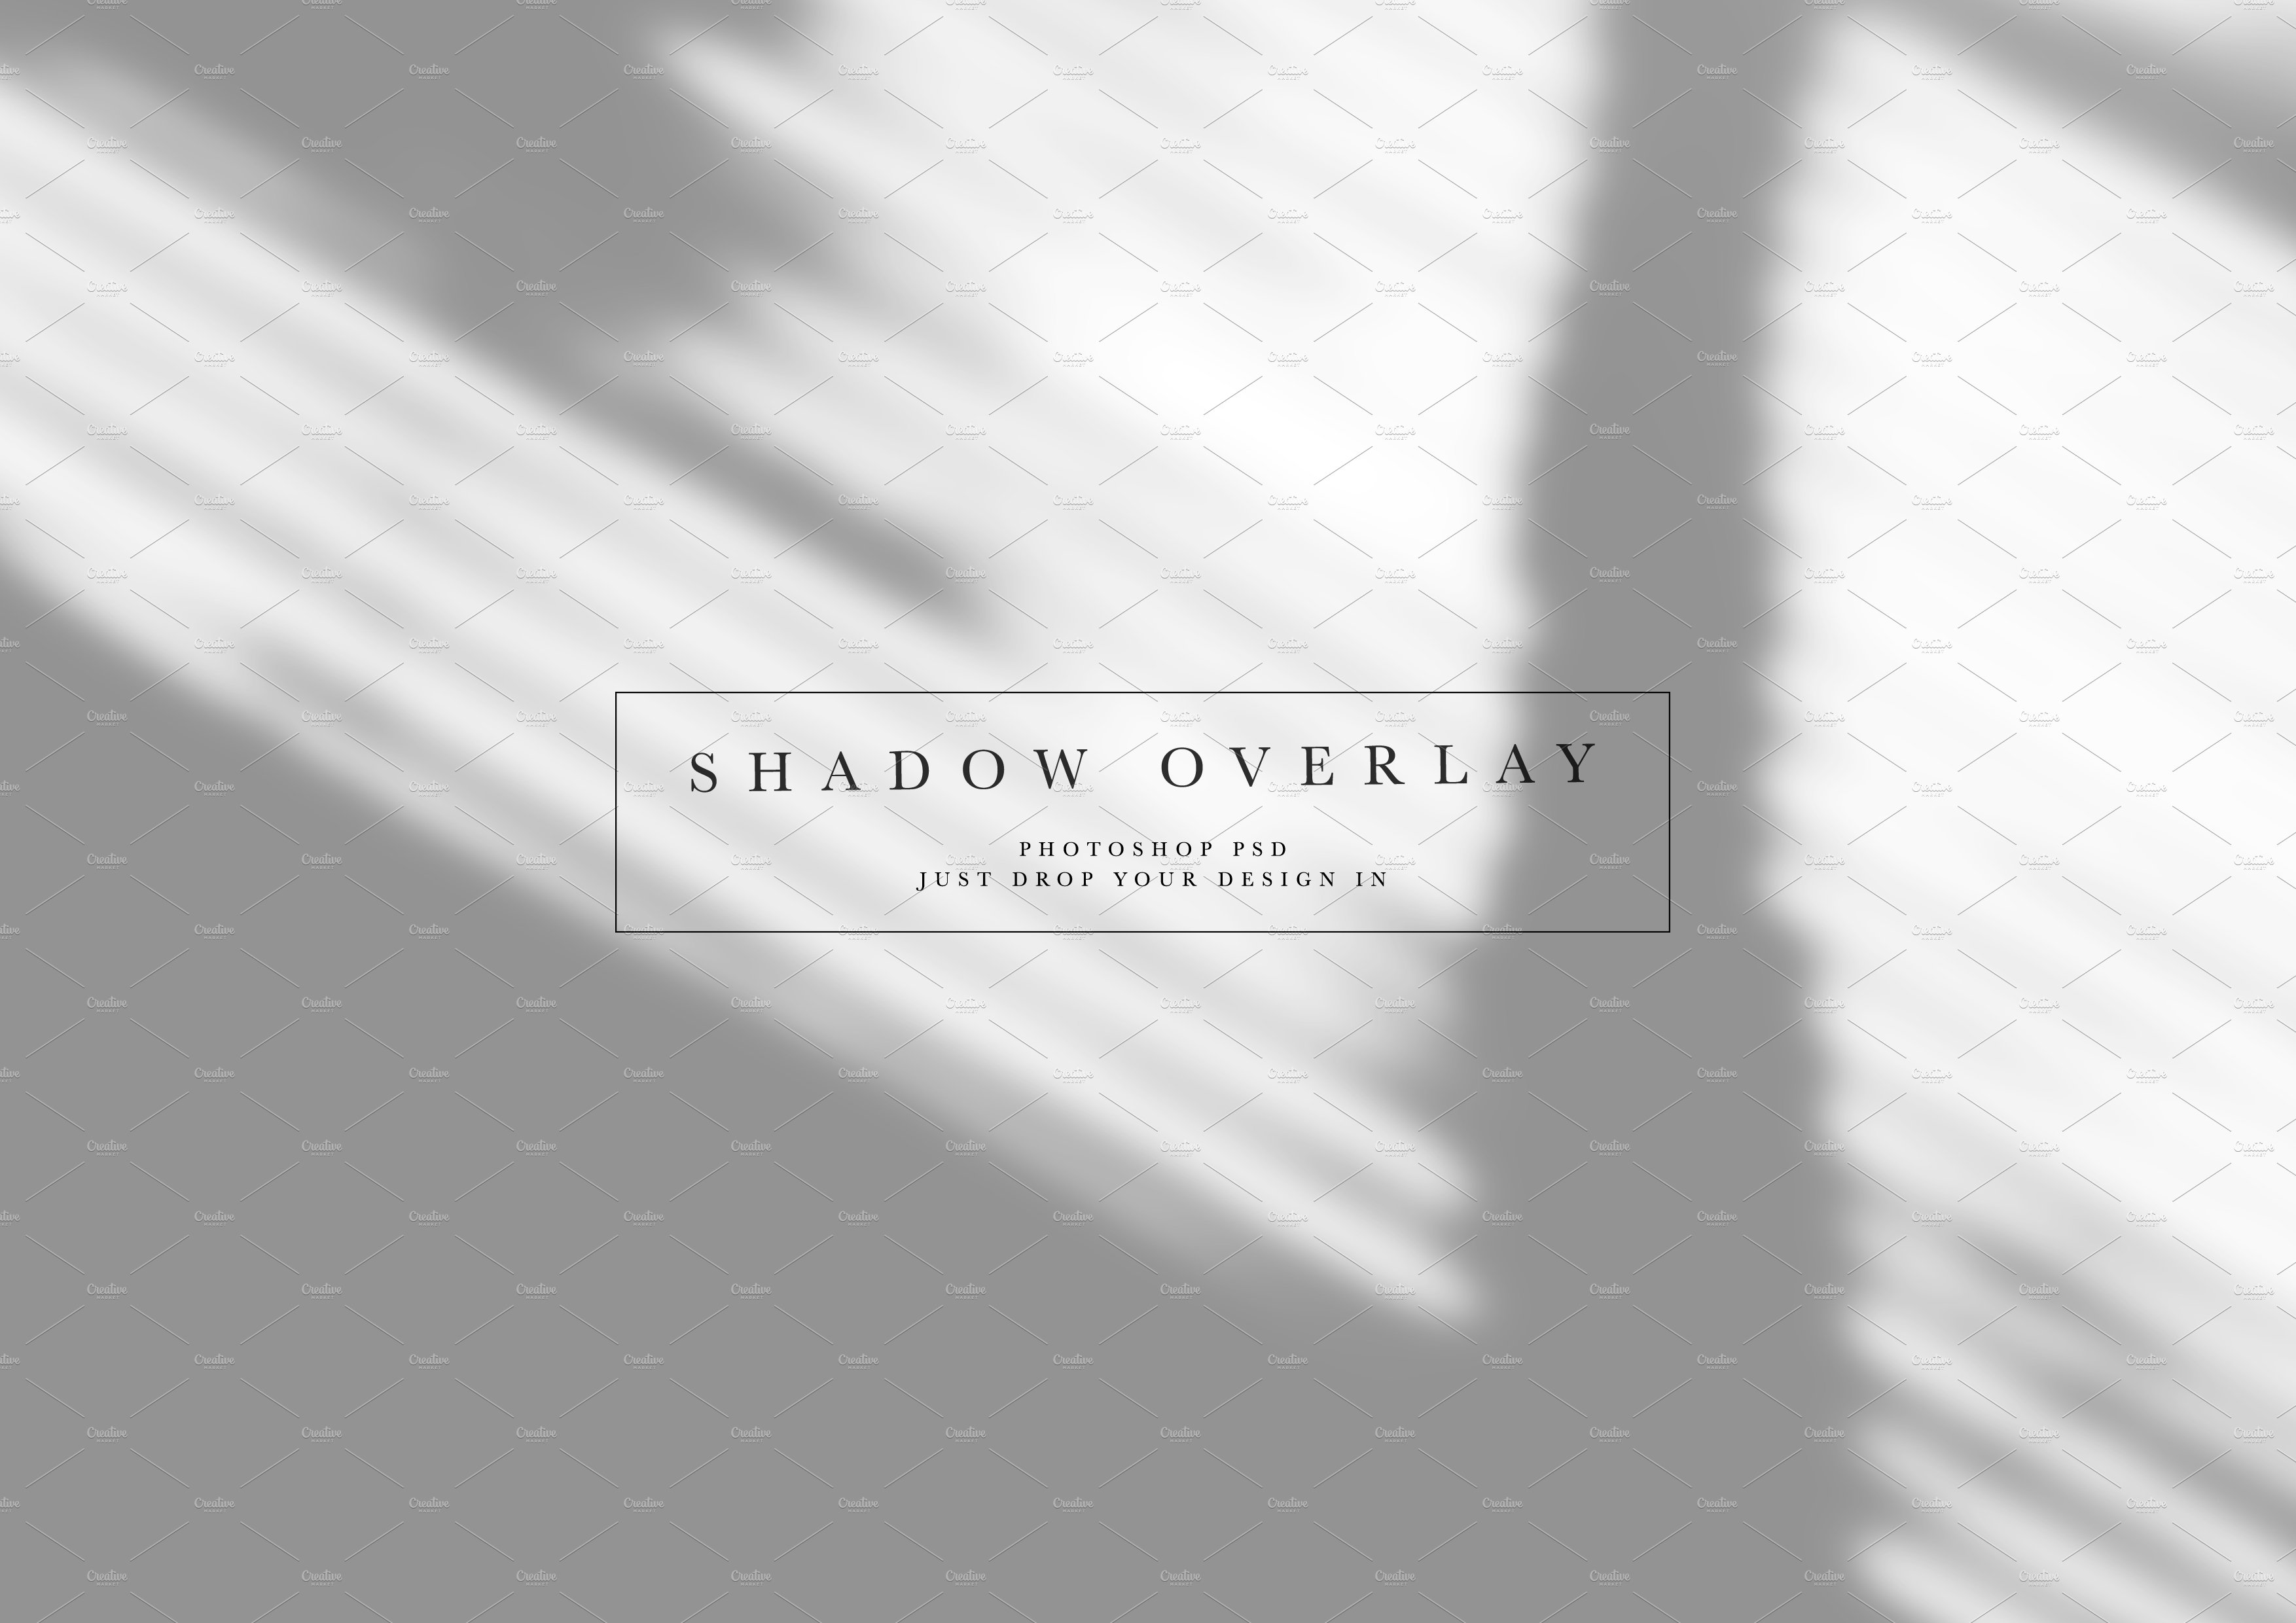 Shadow Overlay #89cover image.